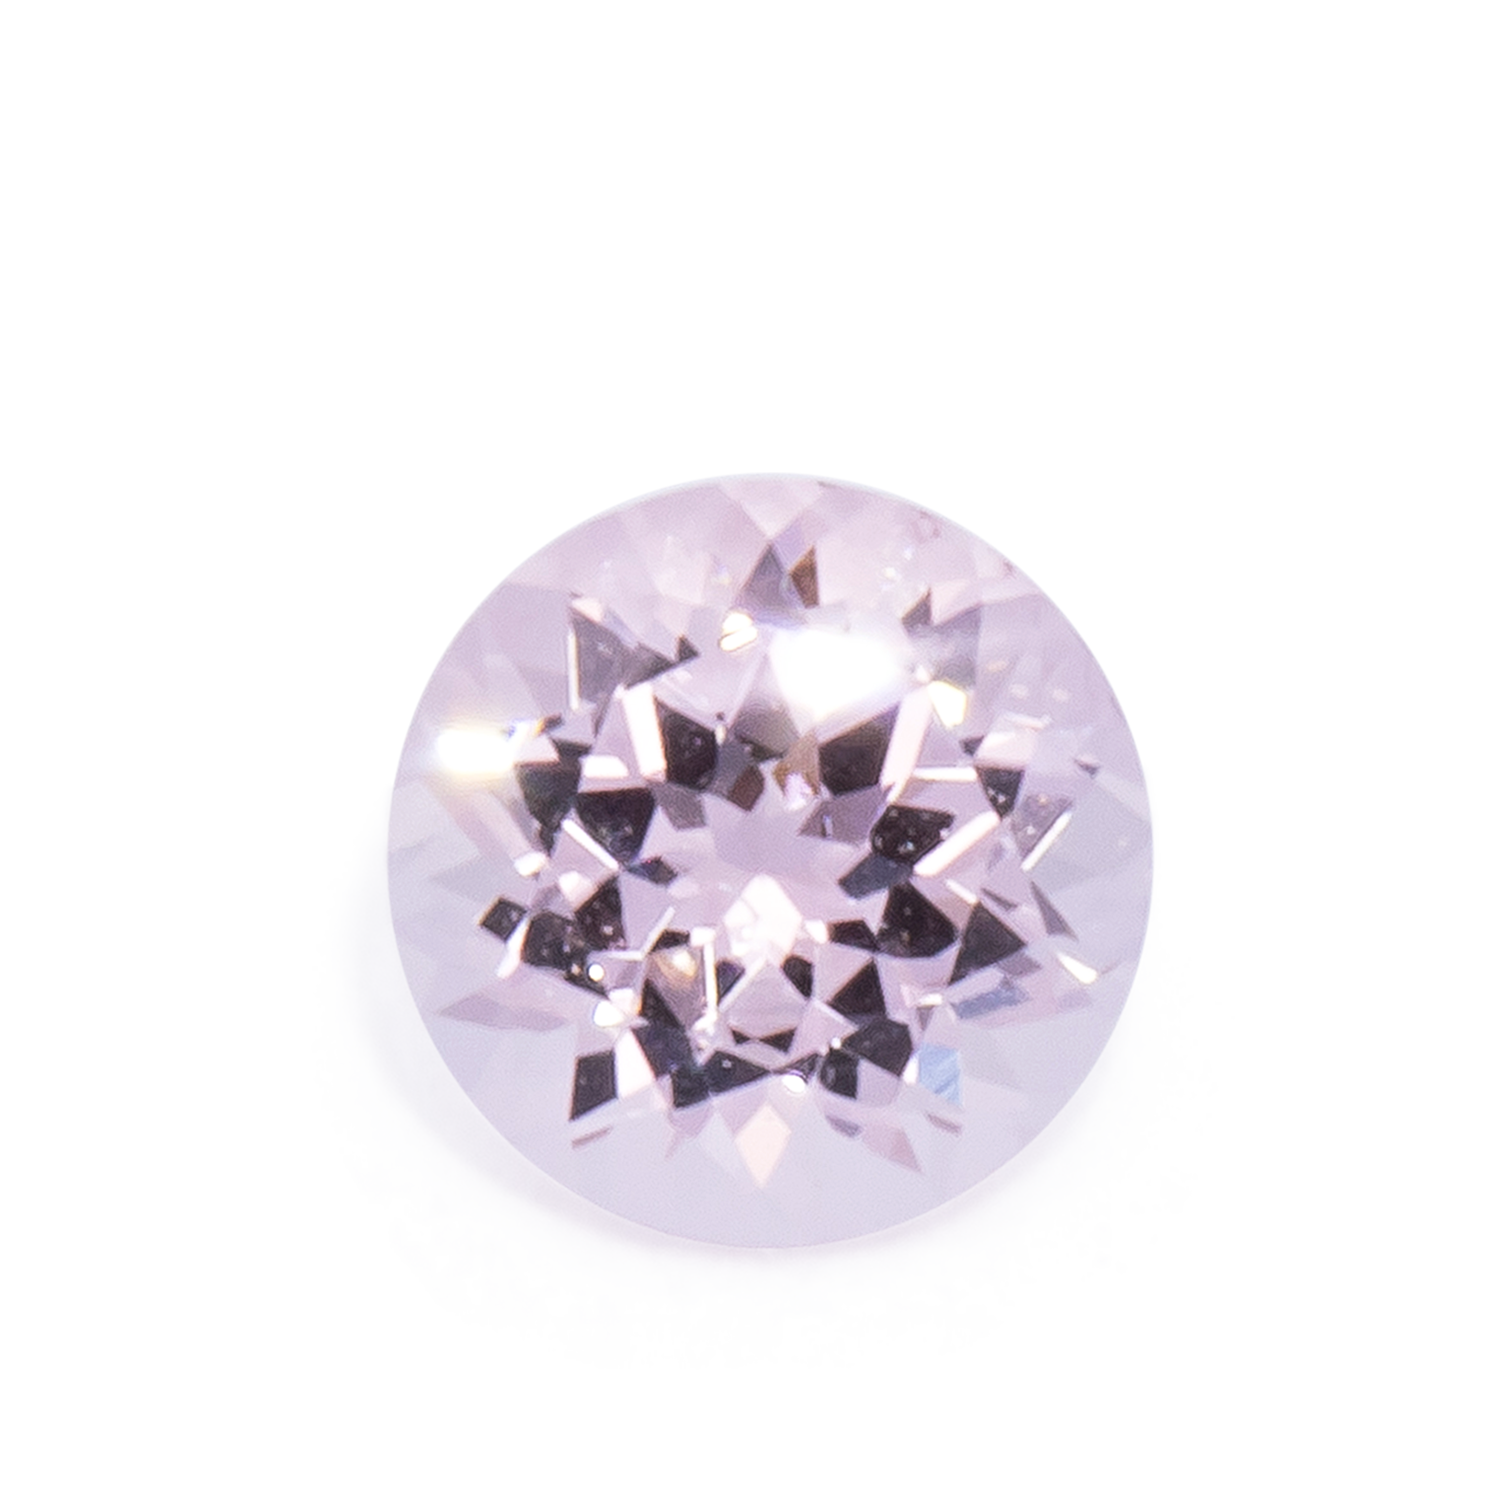 Spinell - rosa, rund, 3.5x3.5 mm, 0.20 cts, Nr. SP90069